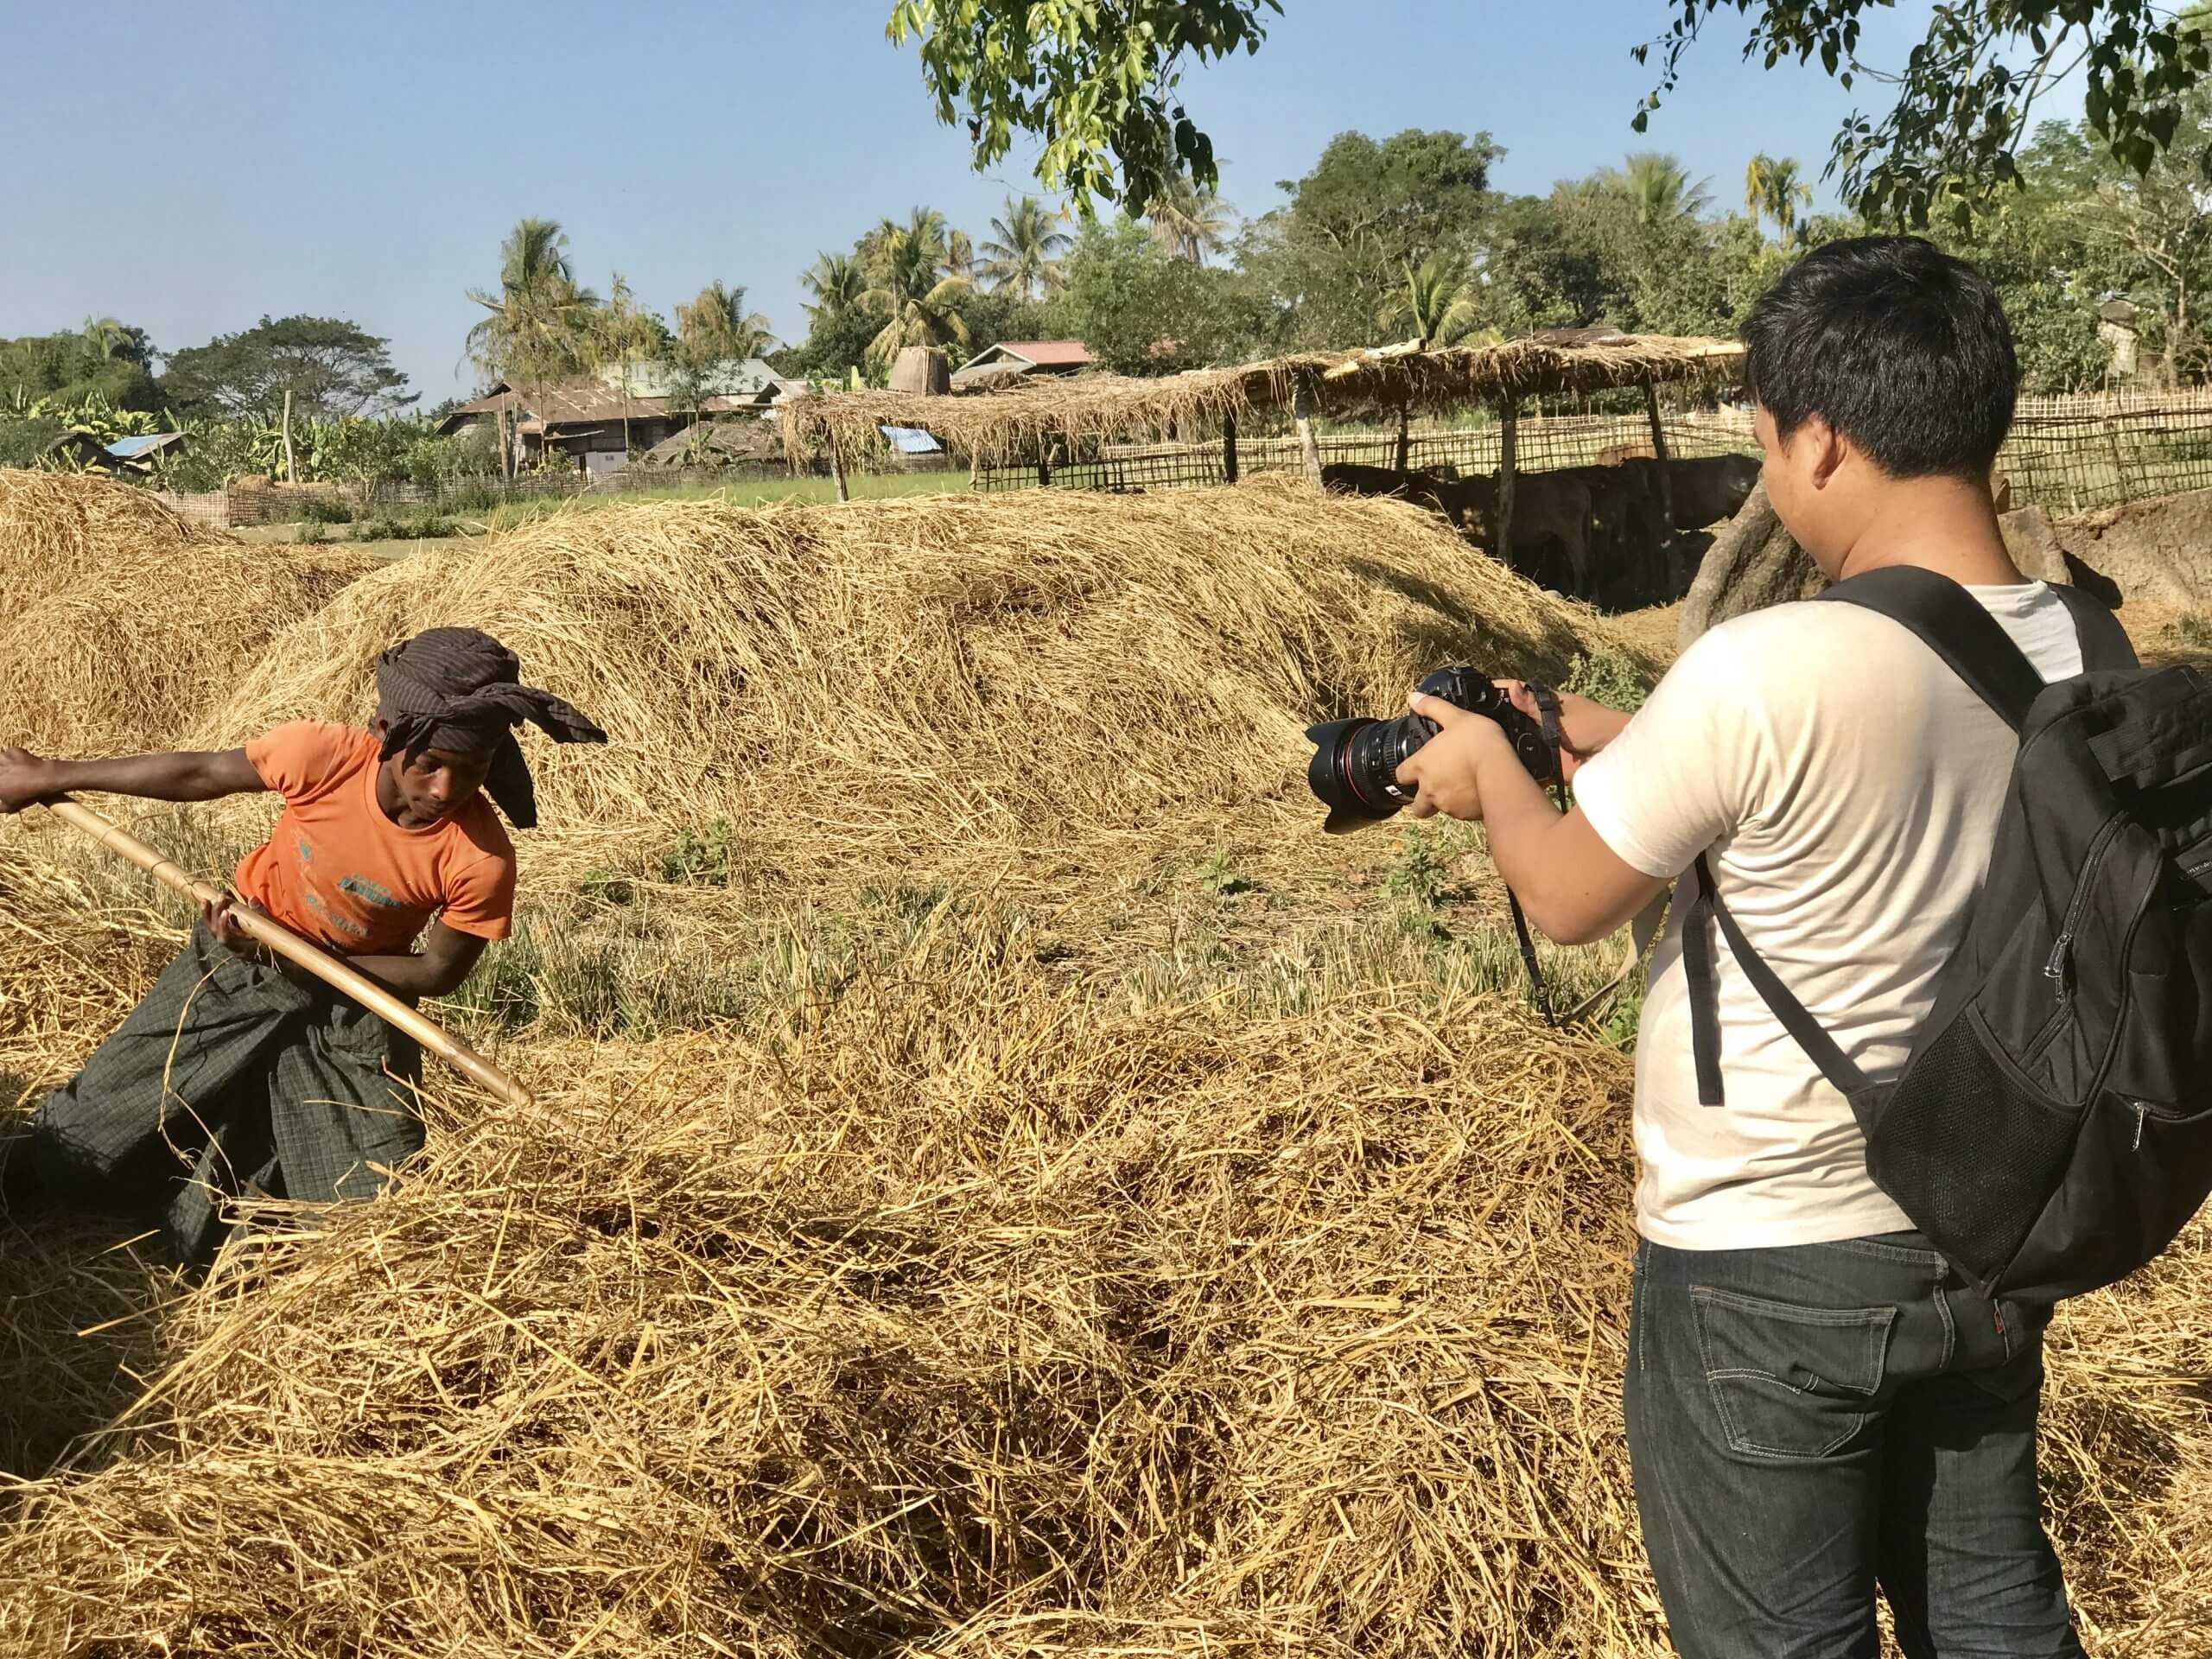 Production still from Midwives. A camera man wearing a backpack is taking video of a young boy moving hay.